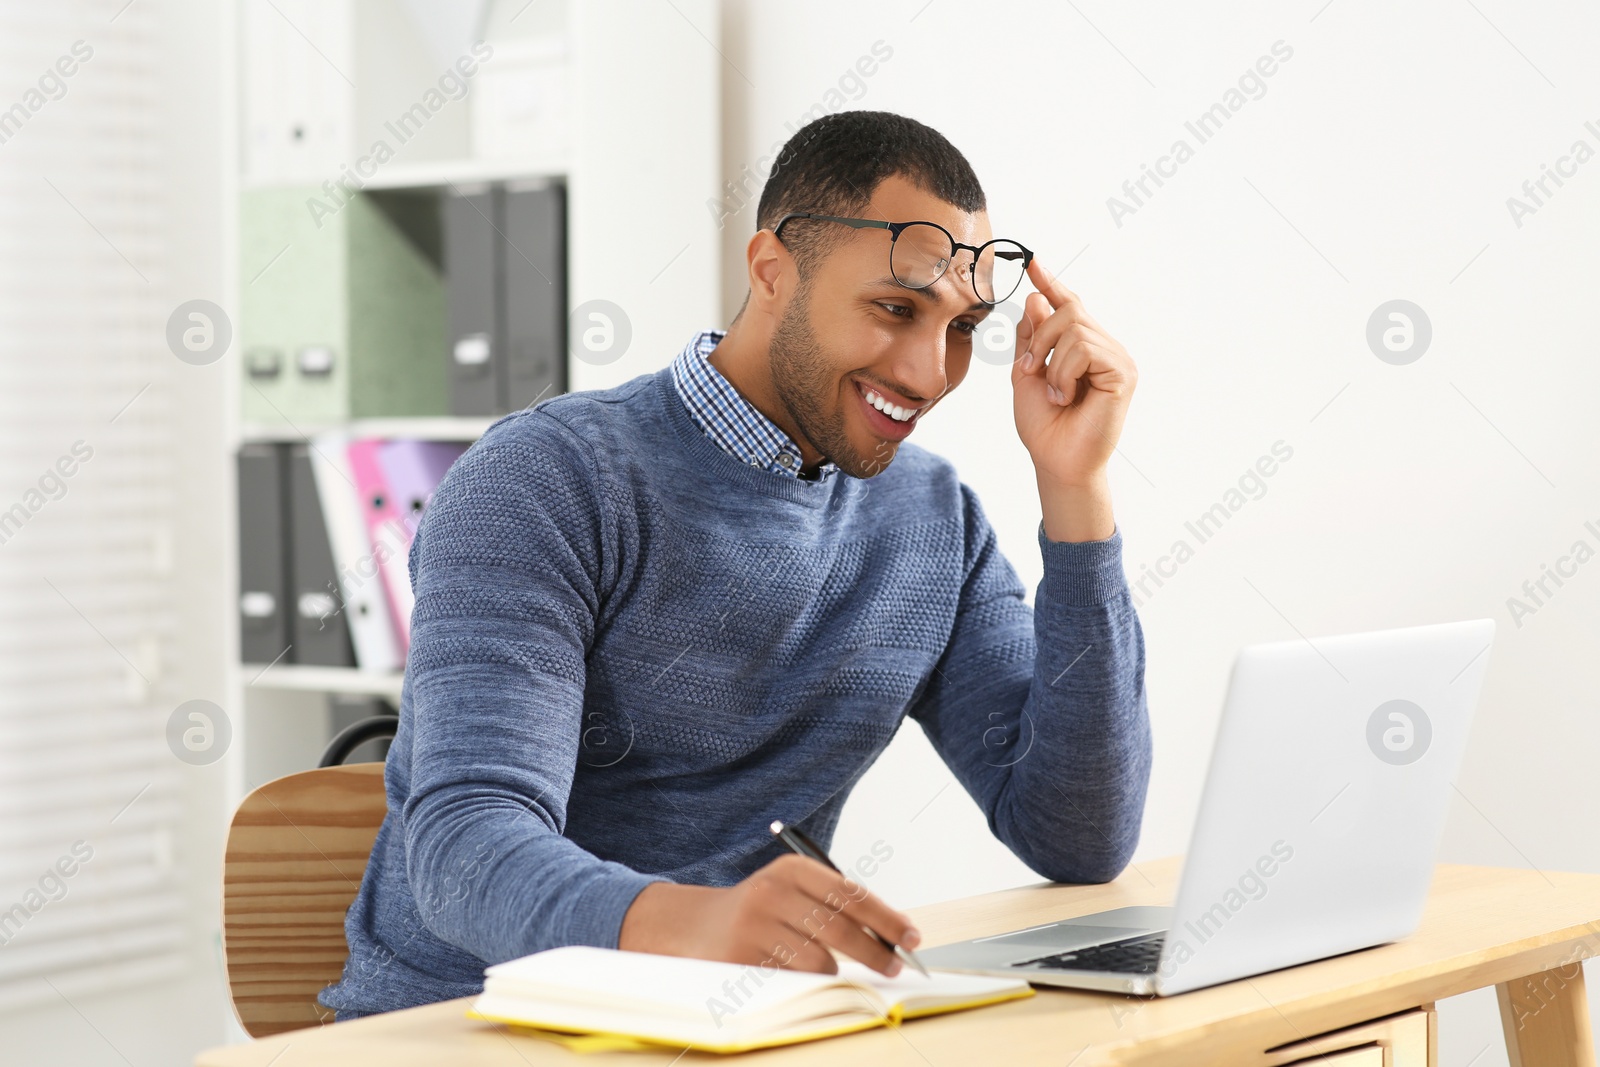 Photo of Smiling African American man writing in notebook at wooden table